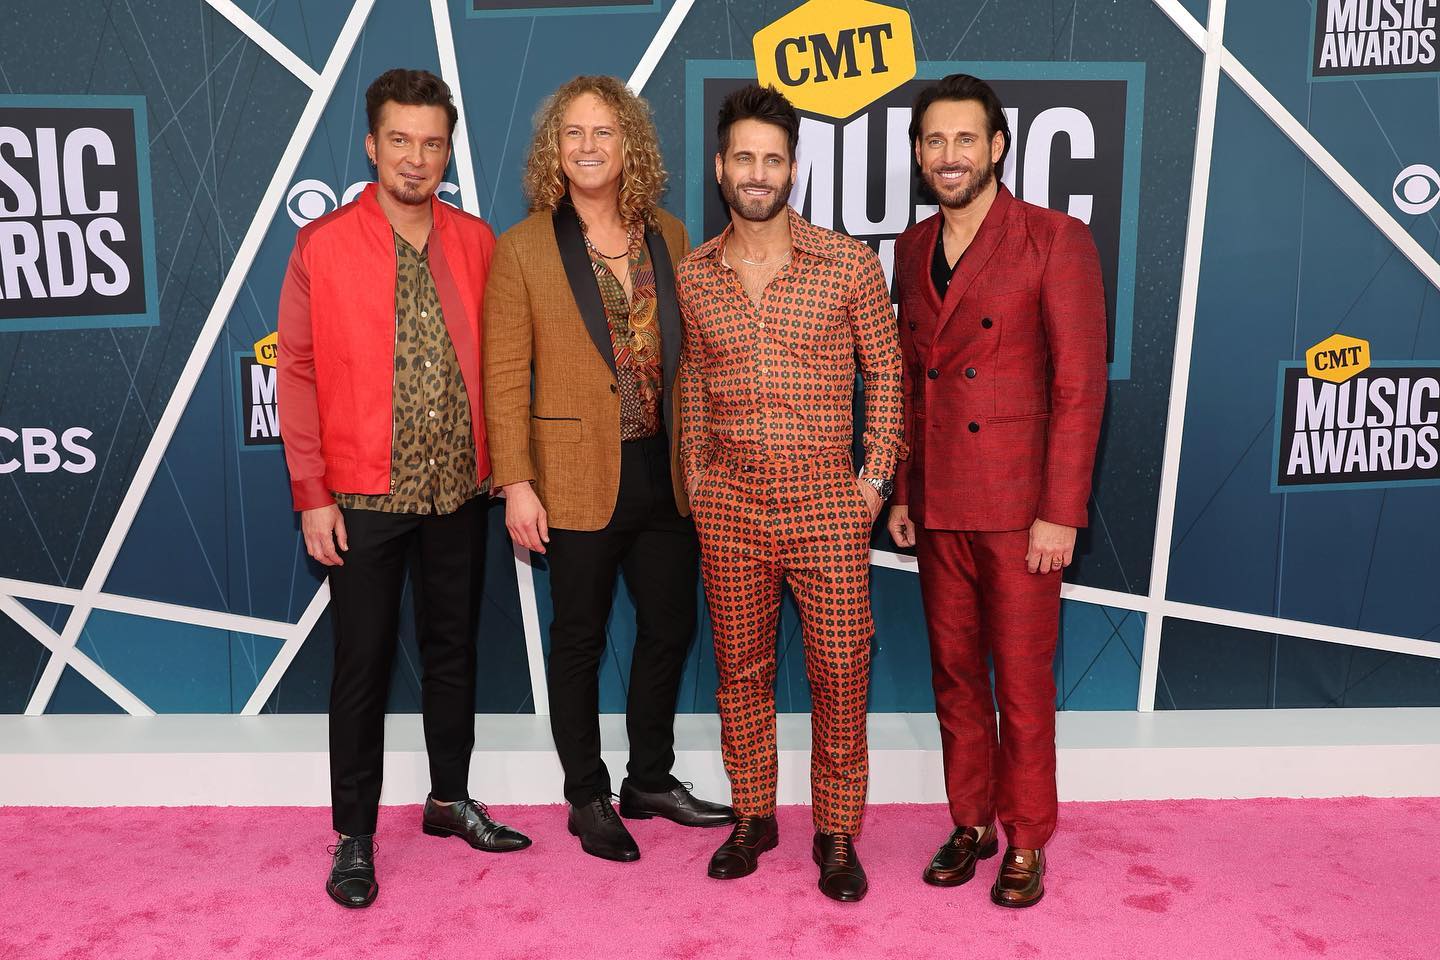 It’s always a party @cmt Awards! 

📸: Jason Kempin 

Styled by: 
@kristaroser
Assisted by: 
@clairetjohnson 
Tailor: 
@andrealacey
Grooming : 
@sharlamakeuphairnashville 

@helenanthonyofficial 
@barolloitaly
 @oceanrebel
@allsaints 
@bonobos
@mrettika
@kennethcole
@dreubeckemberg